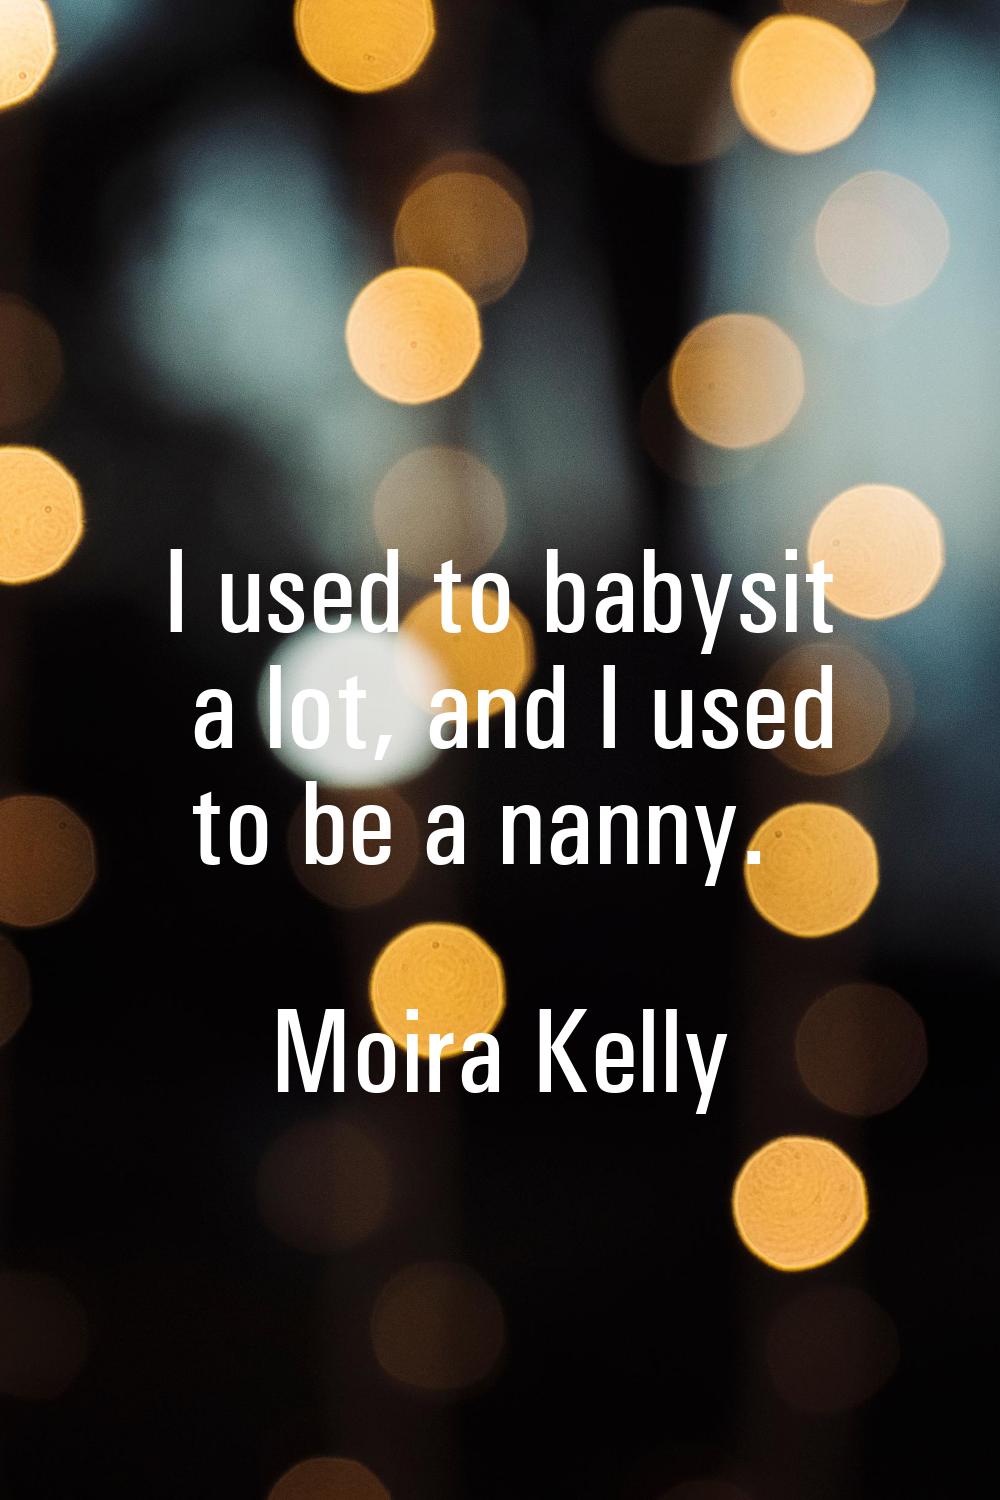 I used to babysit a lot, and I used to be a nanny.